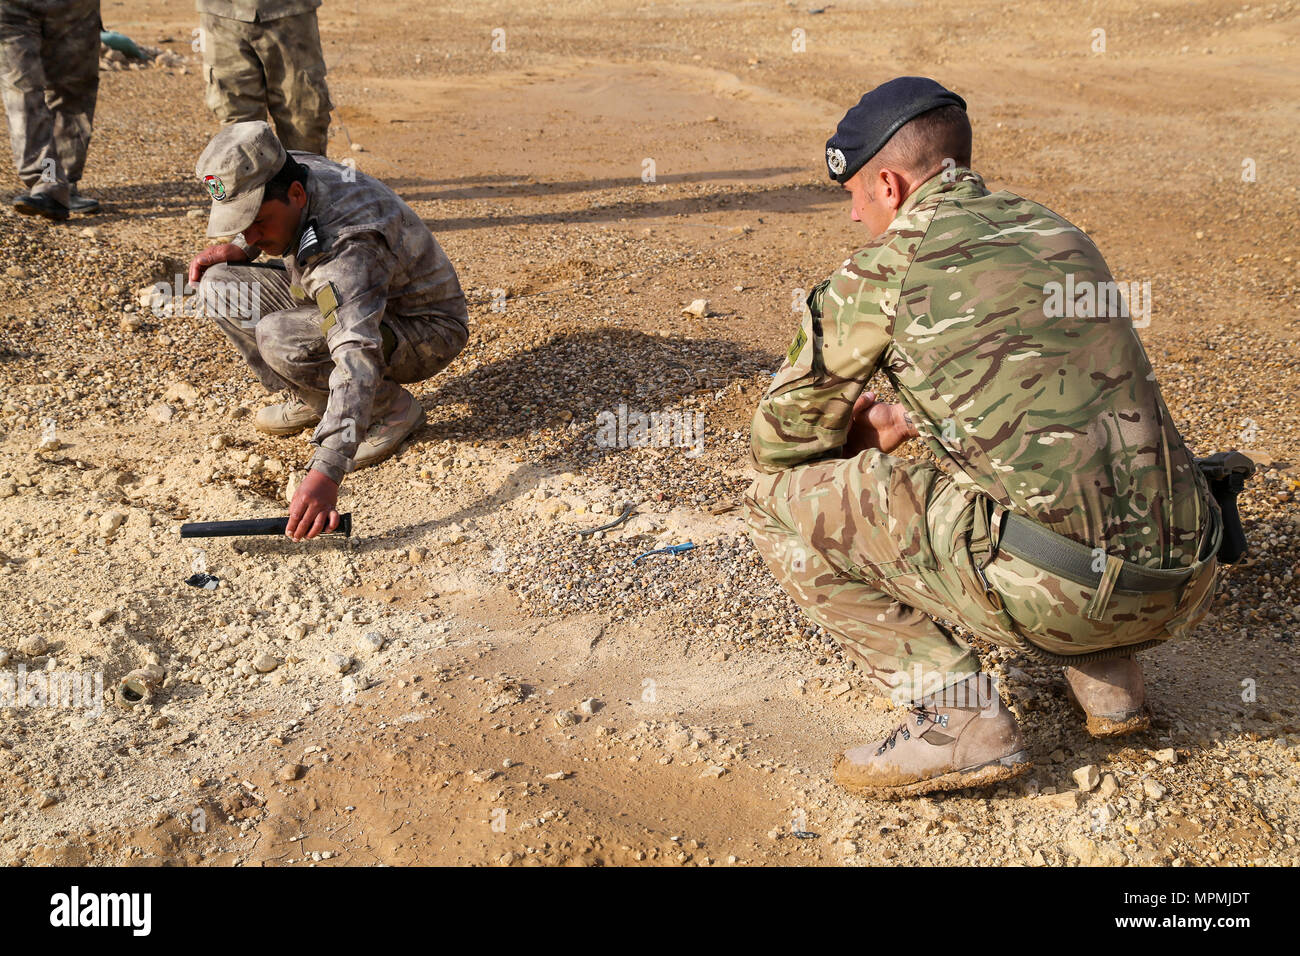 An Iraqi security forces soldier scans for hidden improvised explosive devices under the guidance of a British trainer, deployed in support of Combined Joint Task Force – Operation Inherent Resolve, during counter-IED training at Al Asad Air Base, Iraq, March 29, 2017. This training is part of the overall CJTF- OIR building partner capacity mission by training and improving the capability of partnered forces fighting ISIS. CJTF-OIR is the global Coalition to defeat ISIS in Iraq and Syria. (U.S. Army photo by Sgt. Lisa Soy) Stock Photo